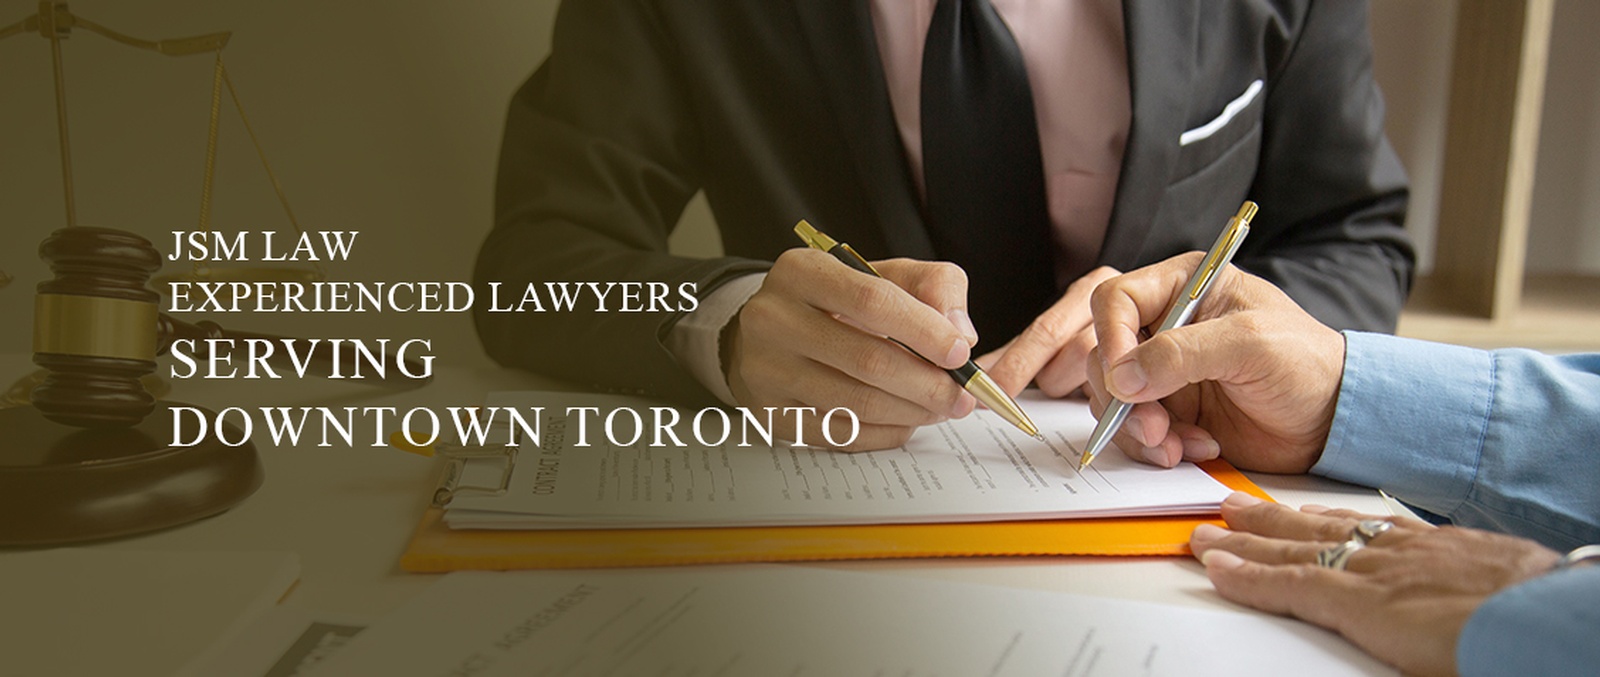 CORPORATE, CRIMINAL AND PERSONAL INJURY LAWYERS DOWNTOWN TORONTO ON